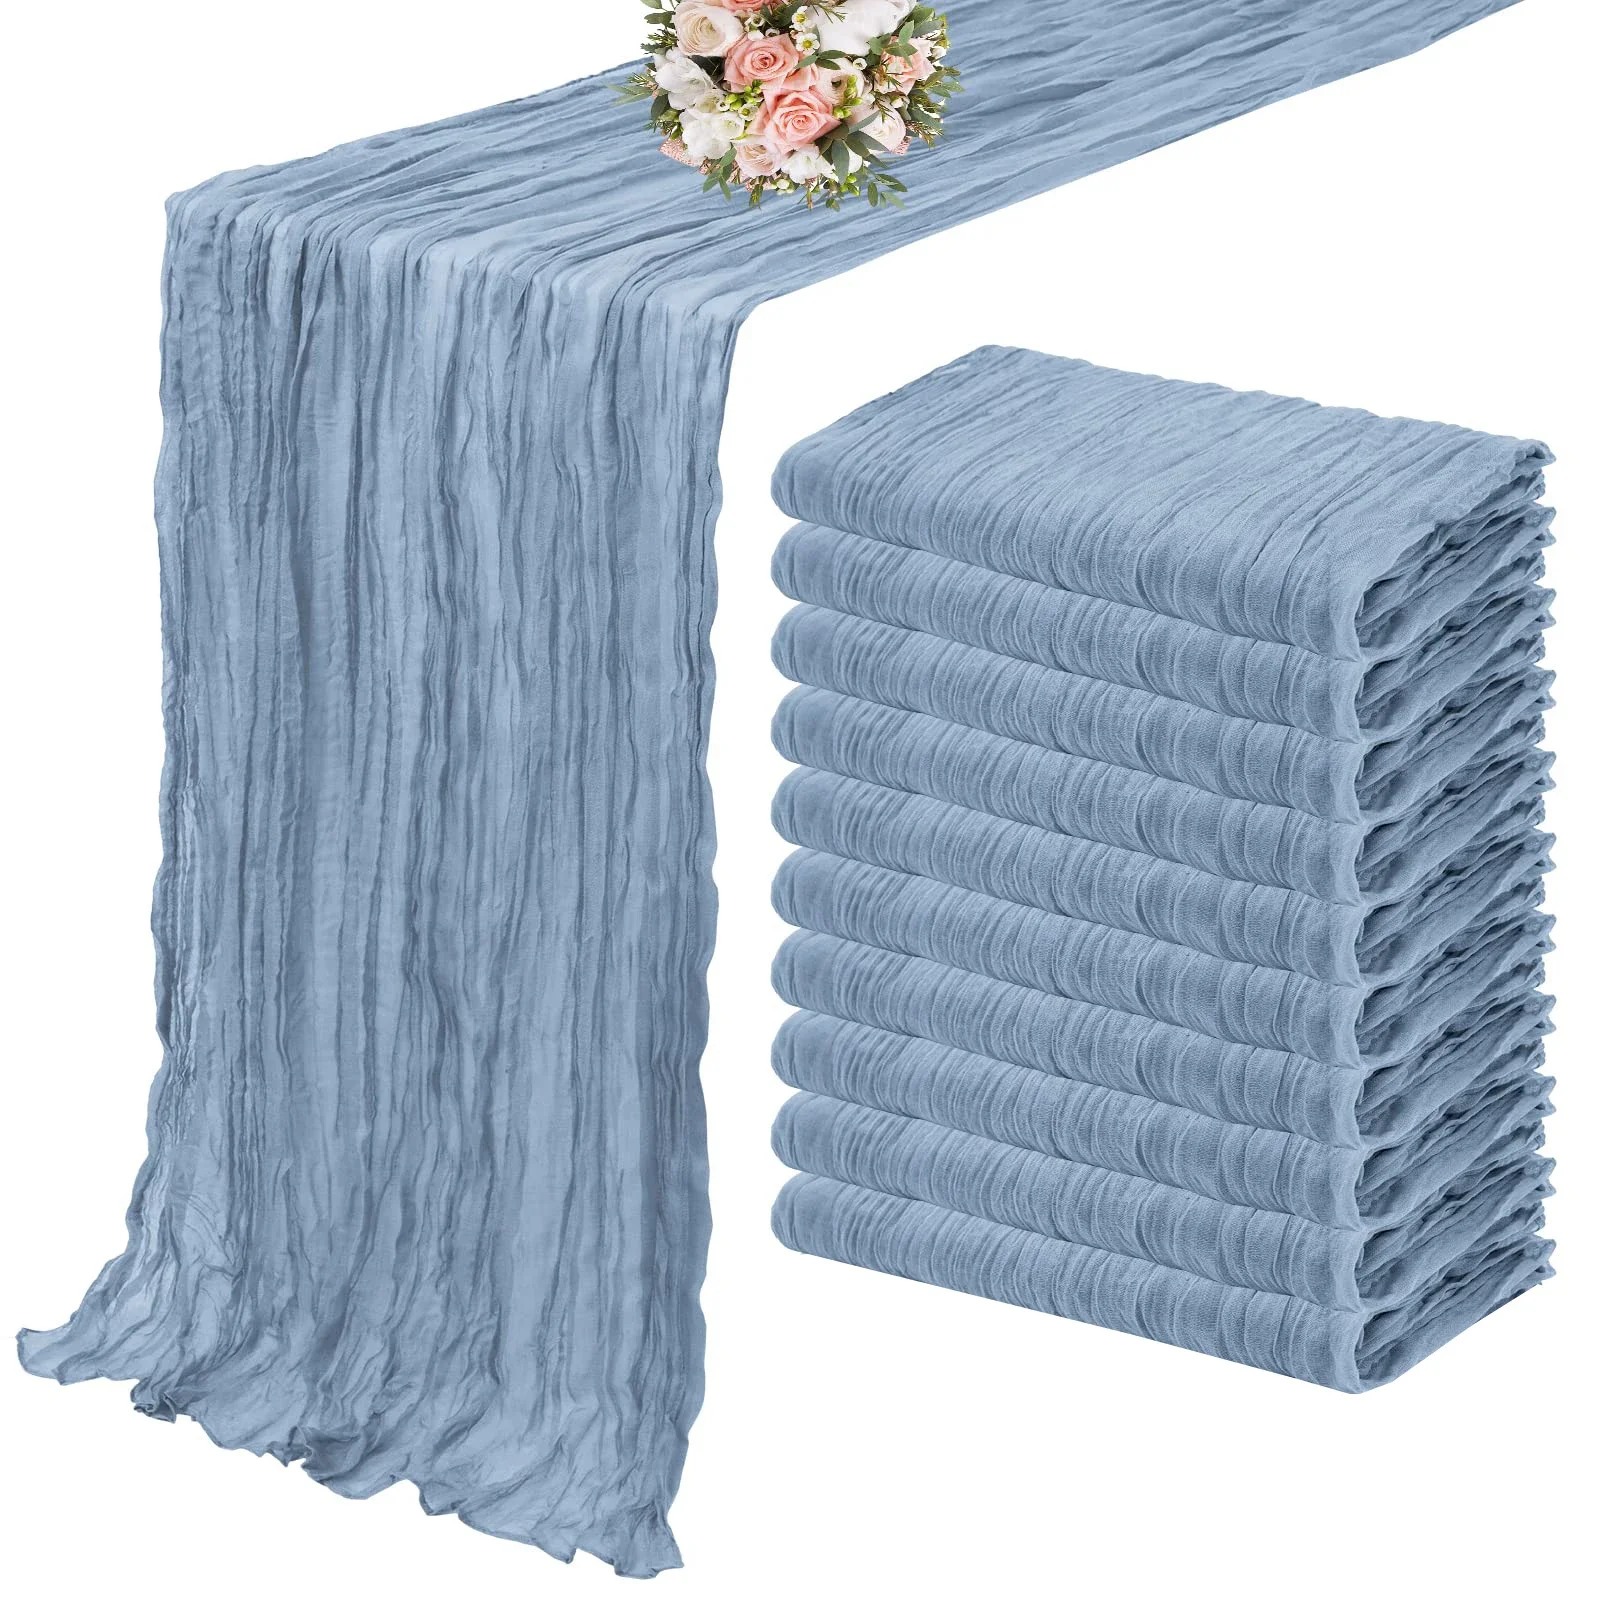 

10PCS Set Semi-Sheer Gauze Wedding Table Runner Grey Blue Cheesecloth Table Dining Party Christmas Banquets Arches Cake Decor